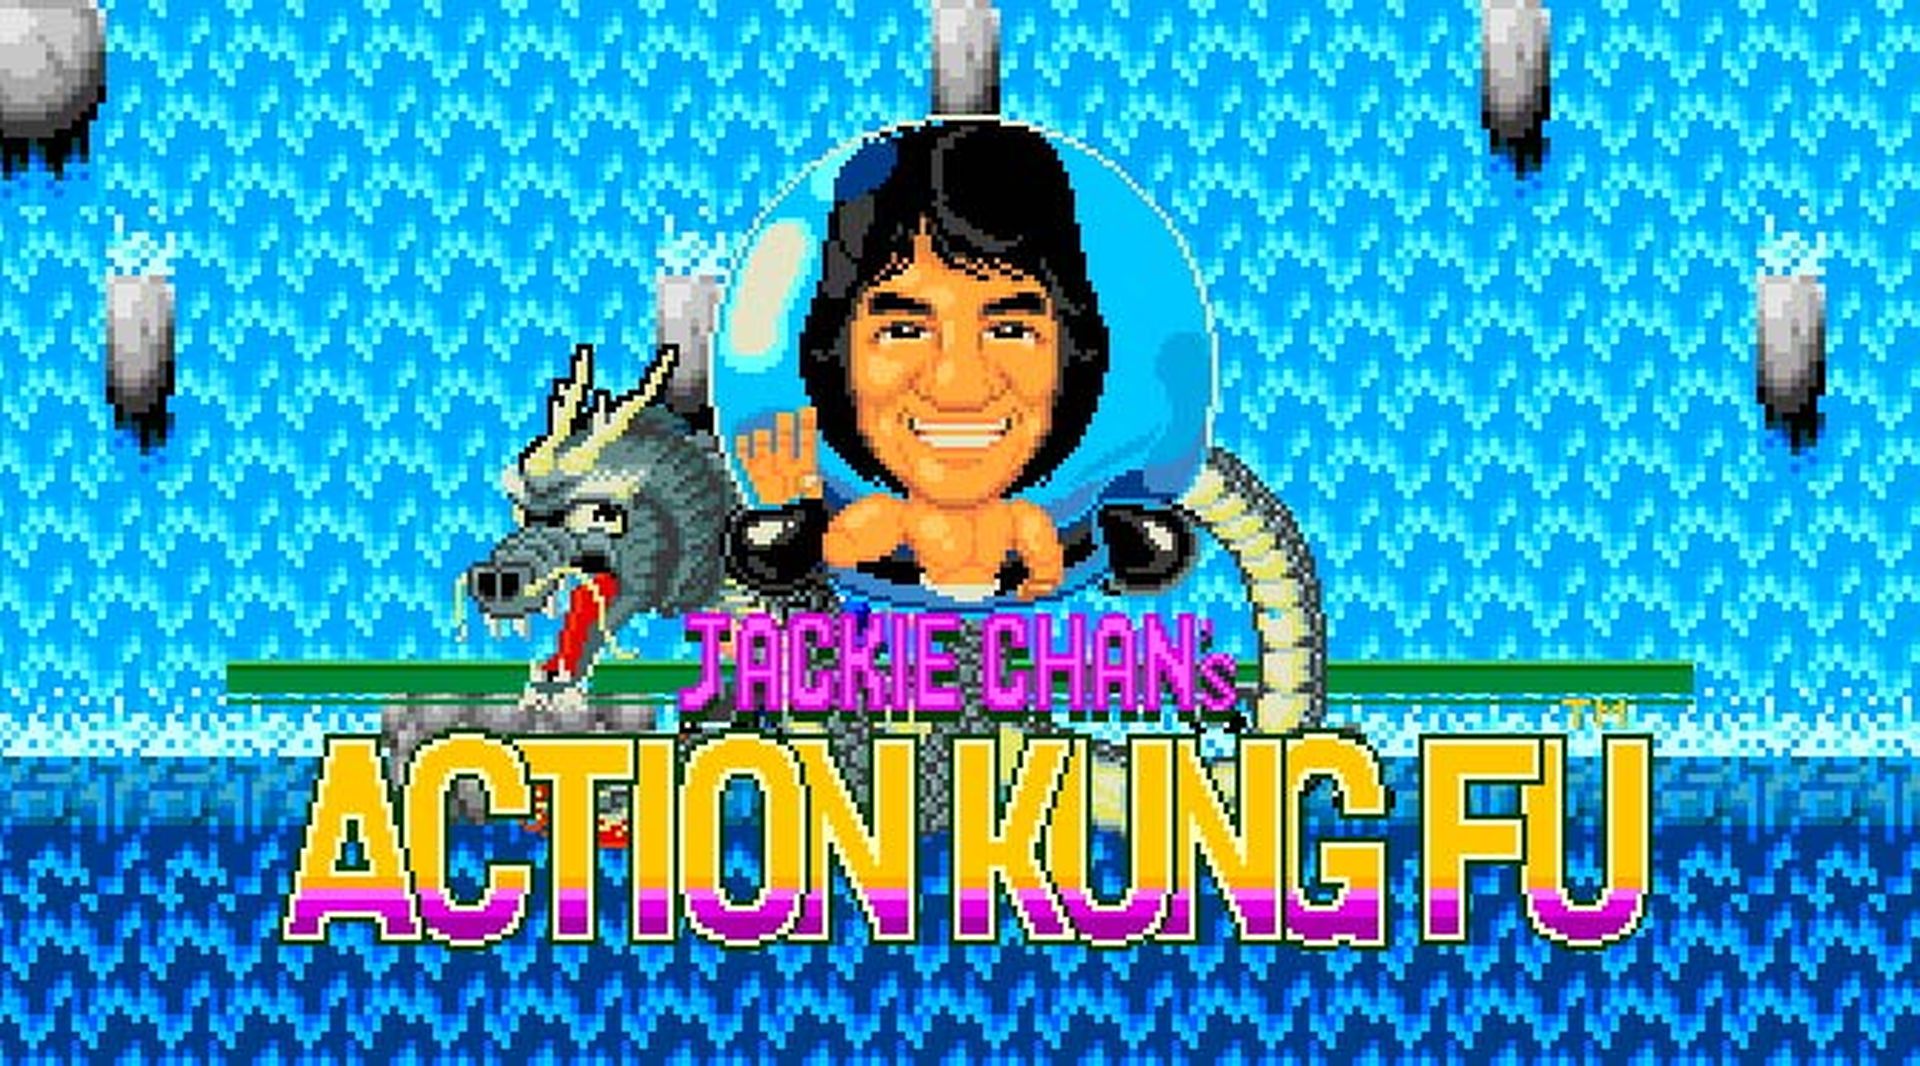 Jackie Chan Action Kung-fu